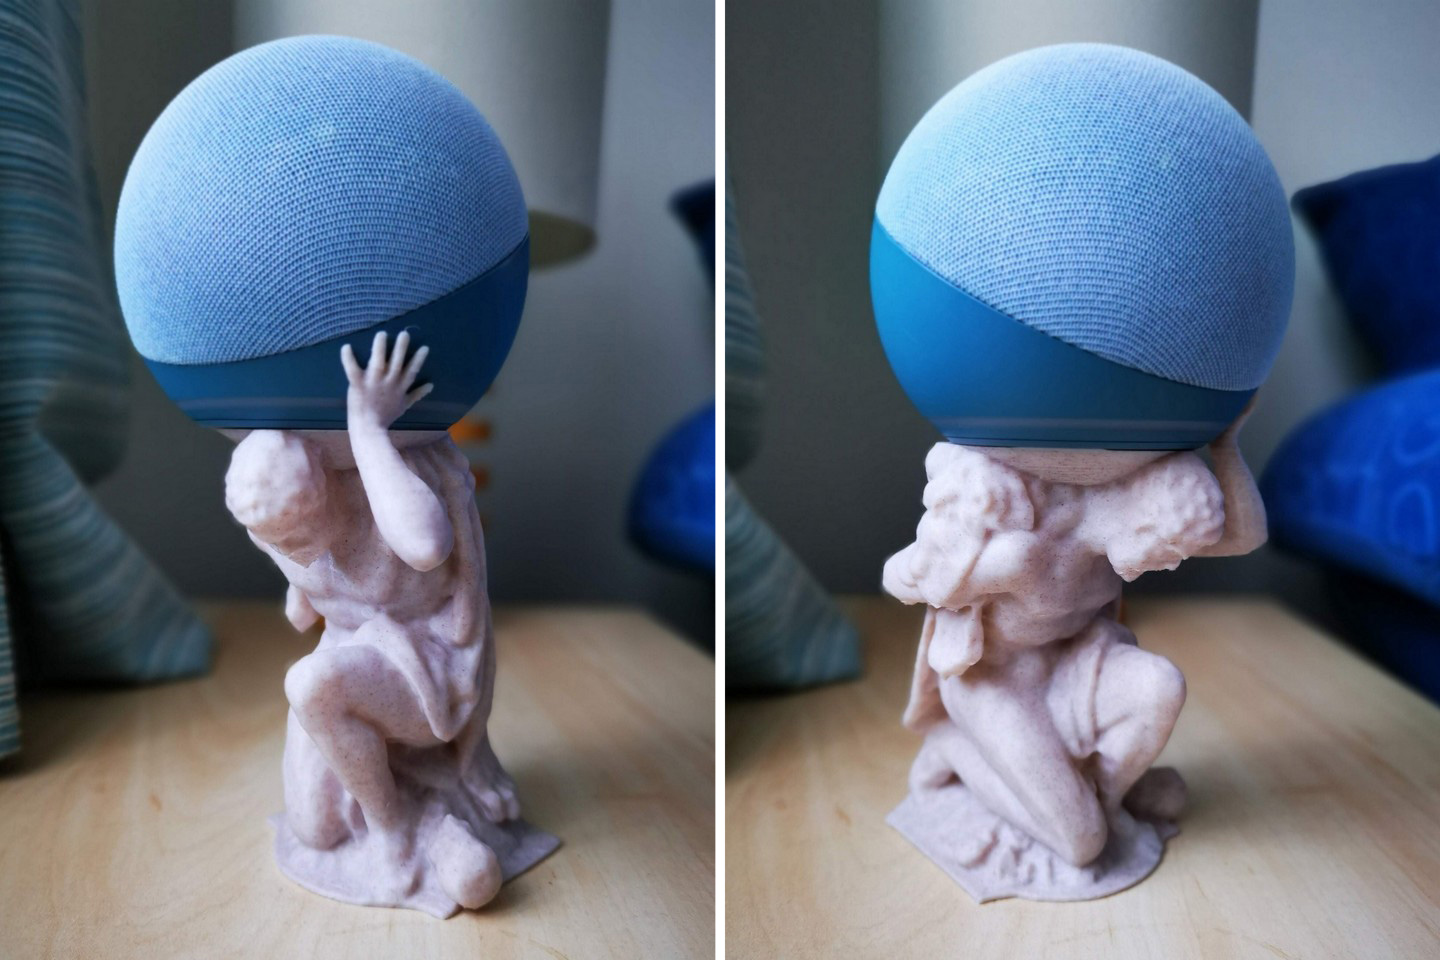 #This Echo Dot speaker stand has the Greek God Atlas holding up your Alexa device